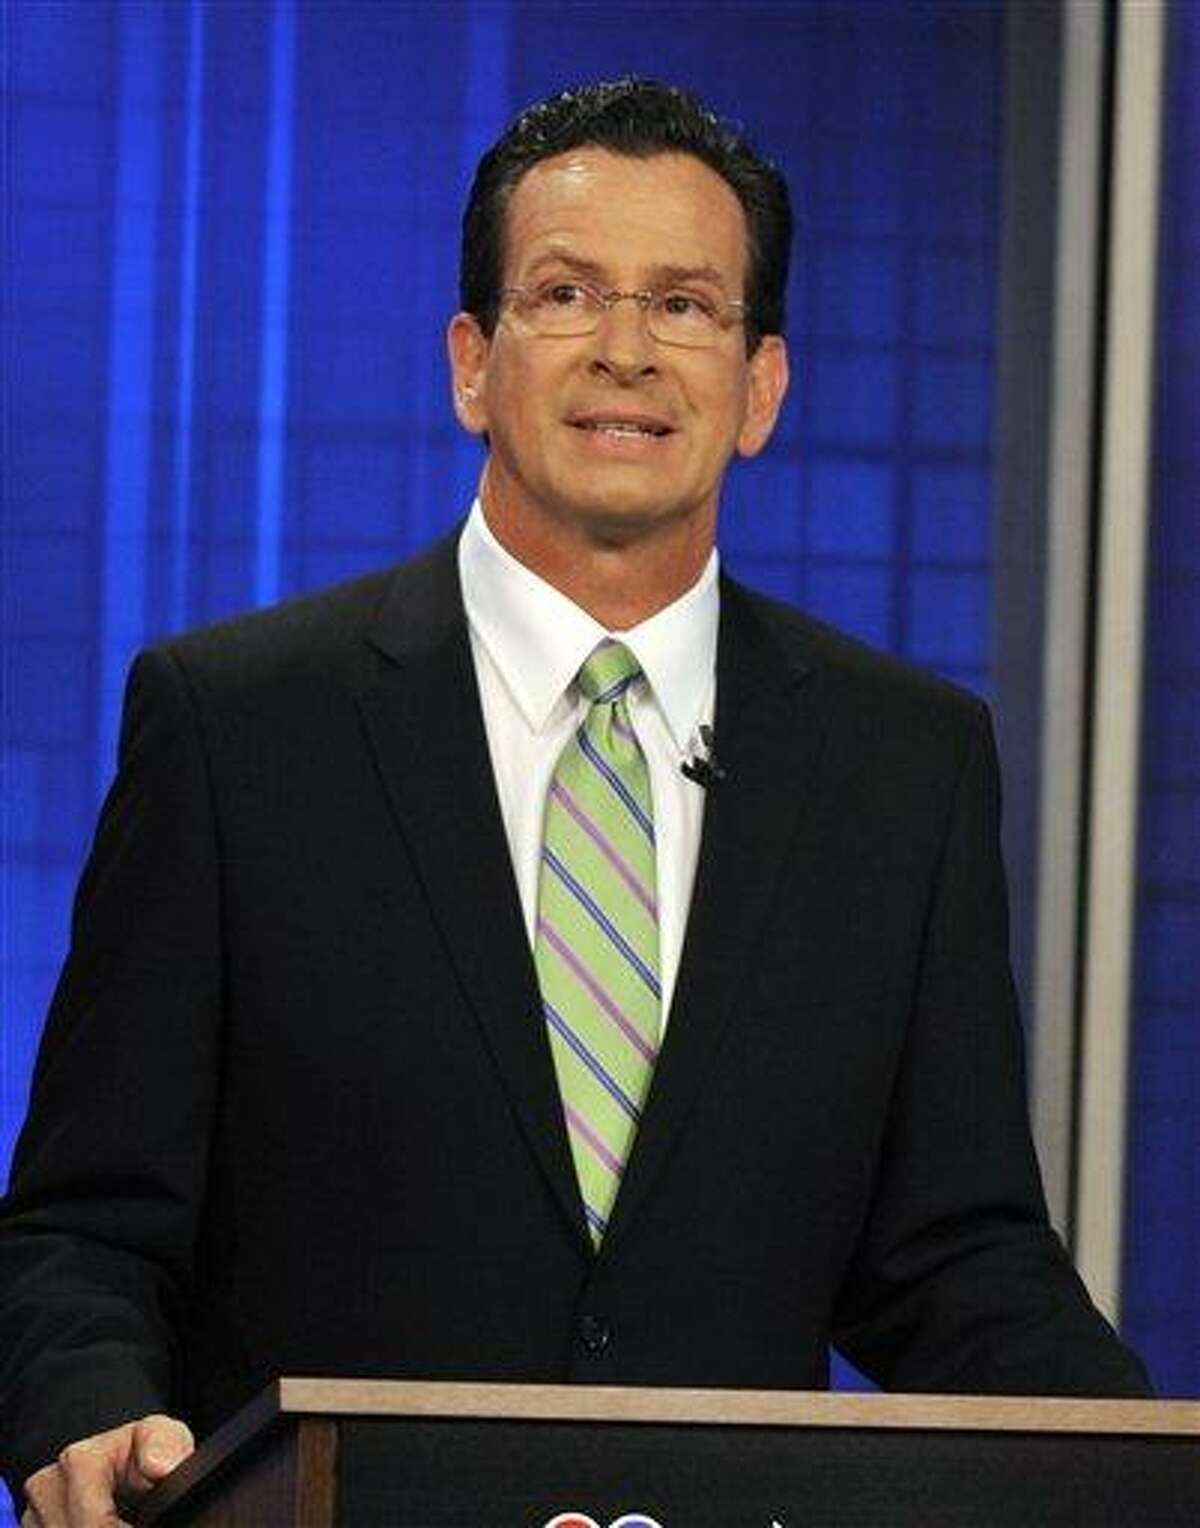 Democratic candidate for governor Dan Malloy stands at a podium during a commercial break for a live televised debate against Ned Lamont in West Hartford, Conn., on Tuesday, June 22, 2010. (AP Photo/Jessica Hill)